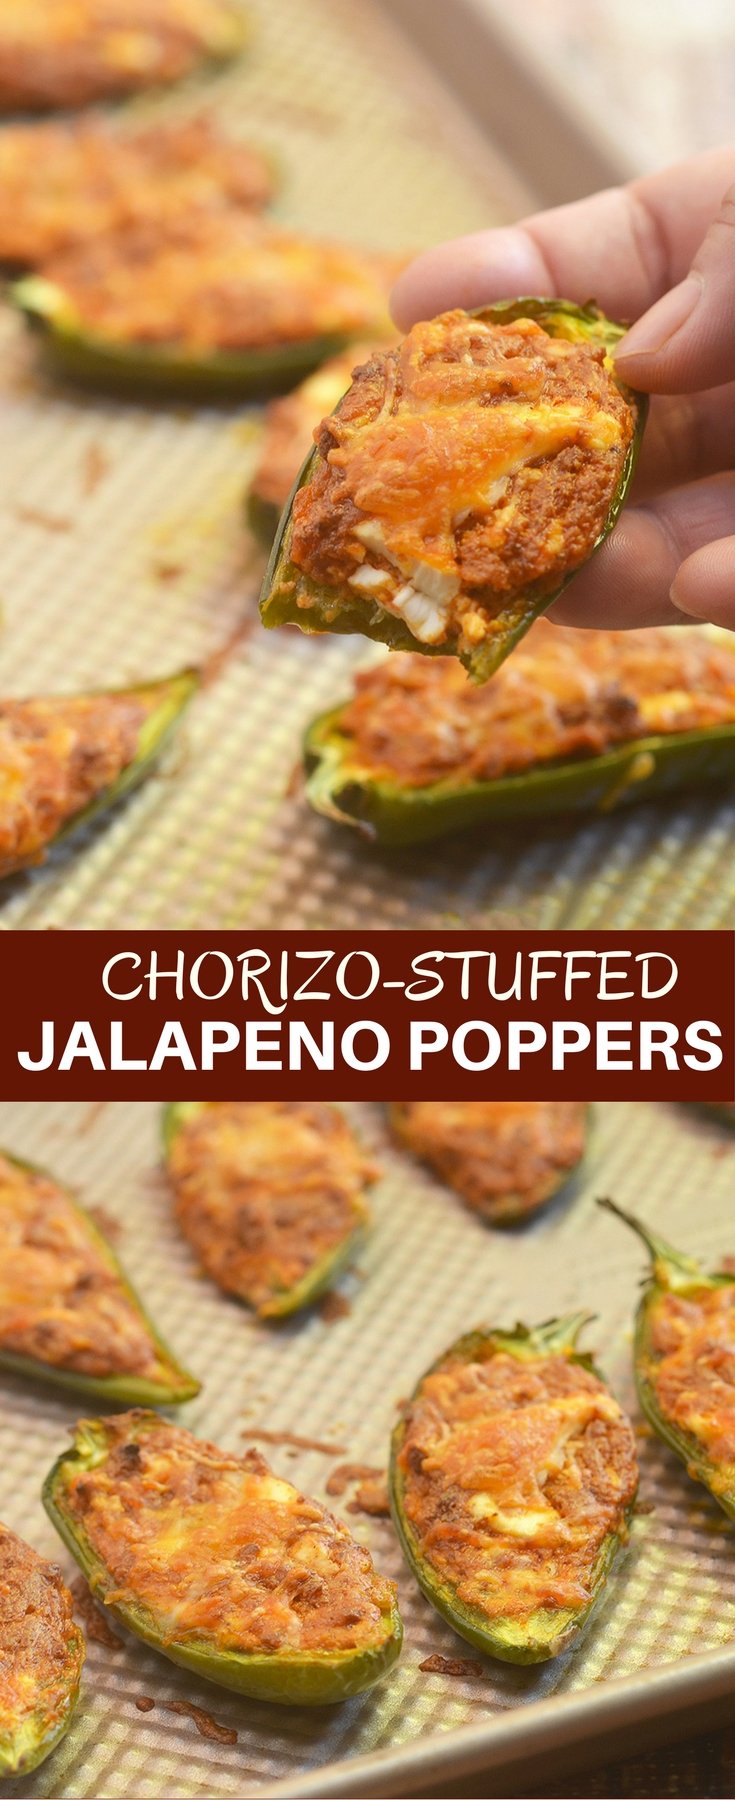 Chorizo-Stuffed Jalapeno Poppers filled with chorizo, cream cheese, and shredded Mexican cheese blend are the perfect game day eats! They're smoky, spicy, creamy and full of bold flavors you'll love in an appetizer!